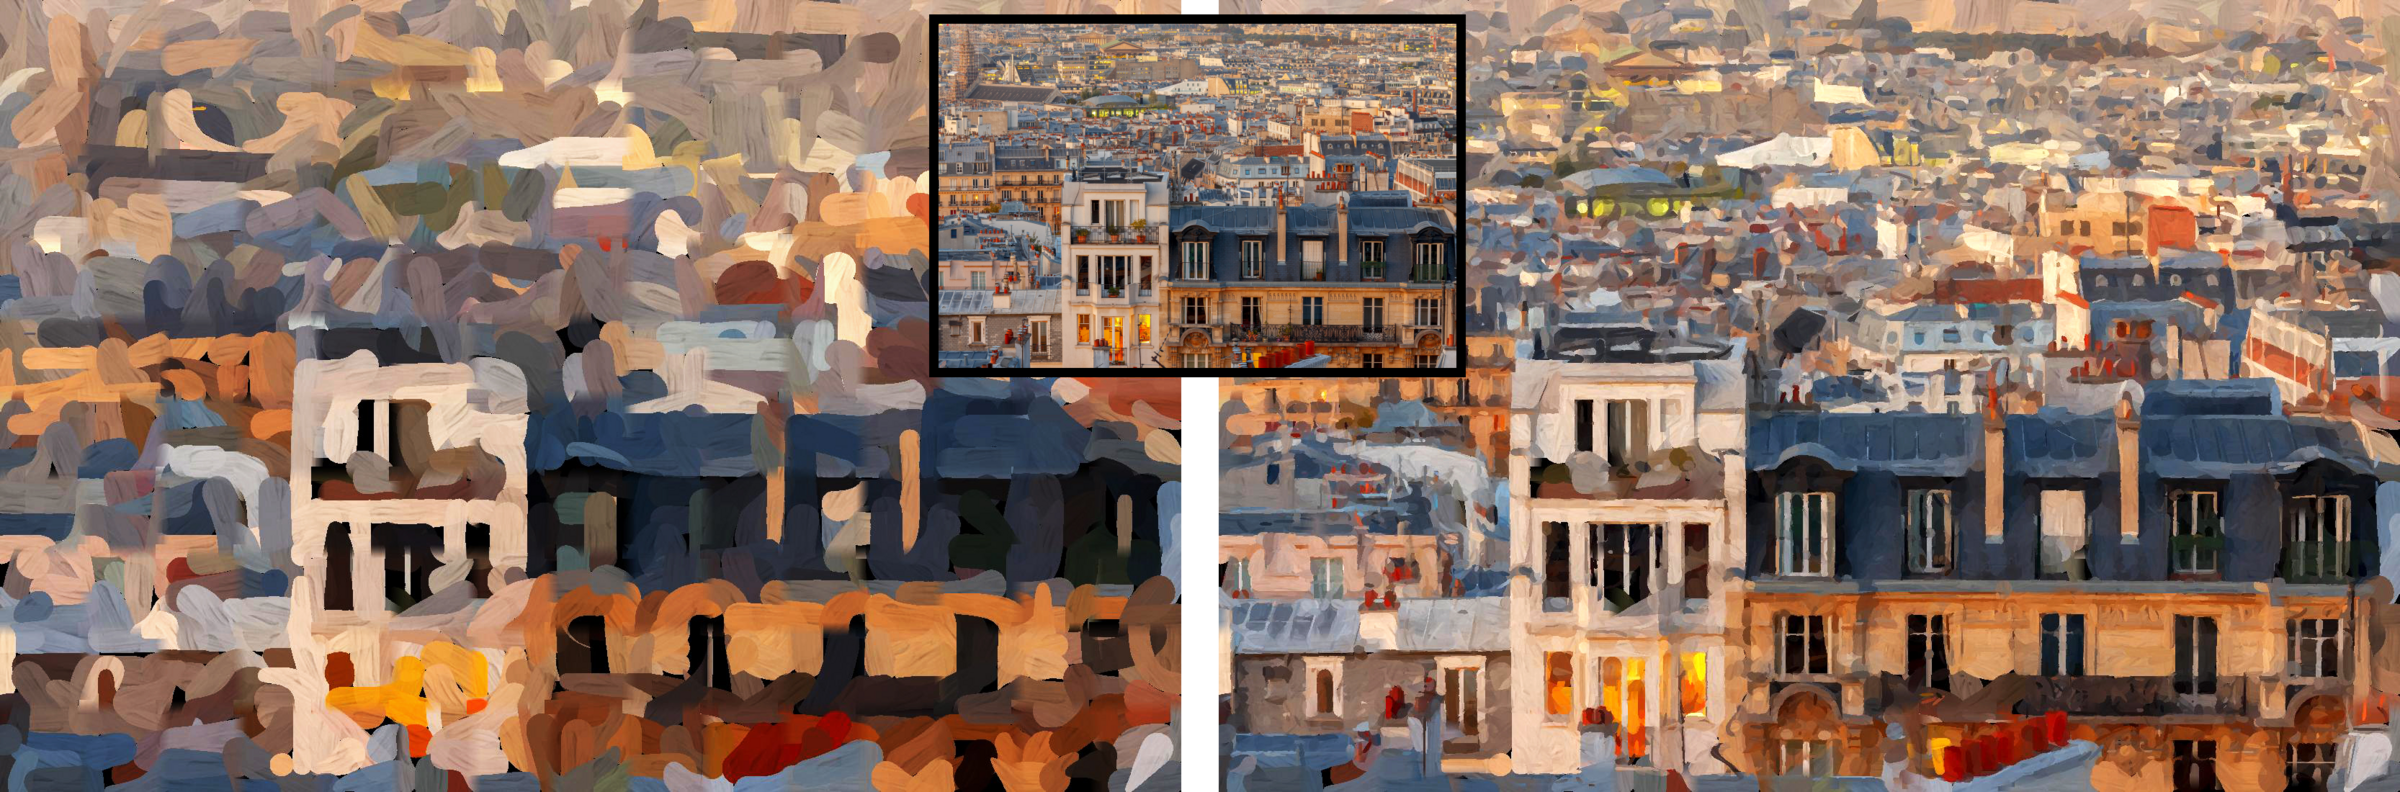 Two renderings of a cityscape generated by artistic artificial intelligence.